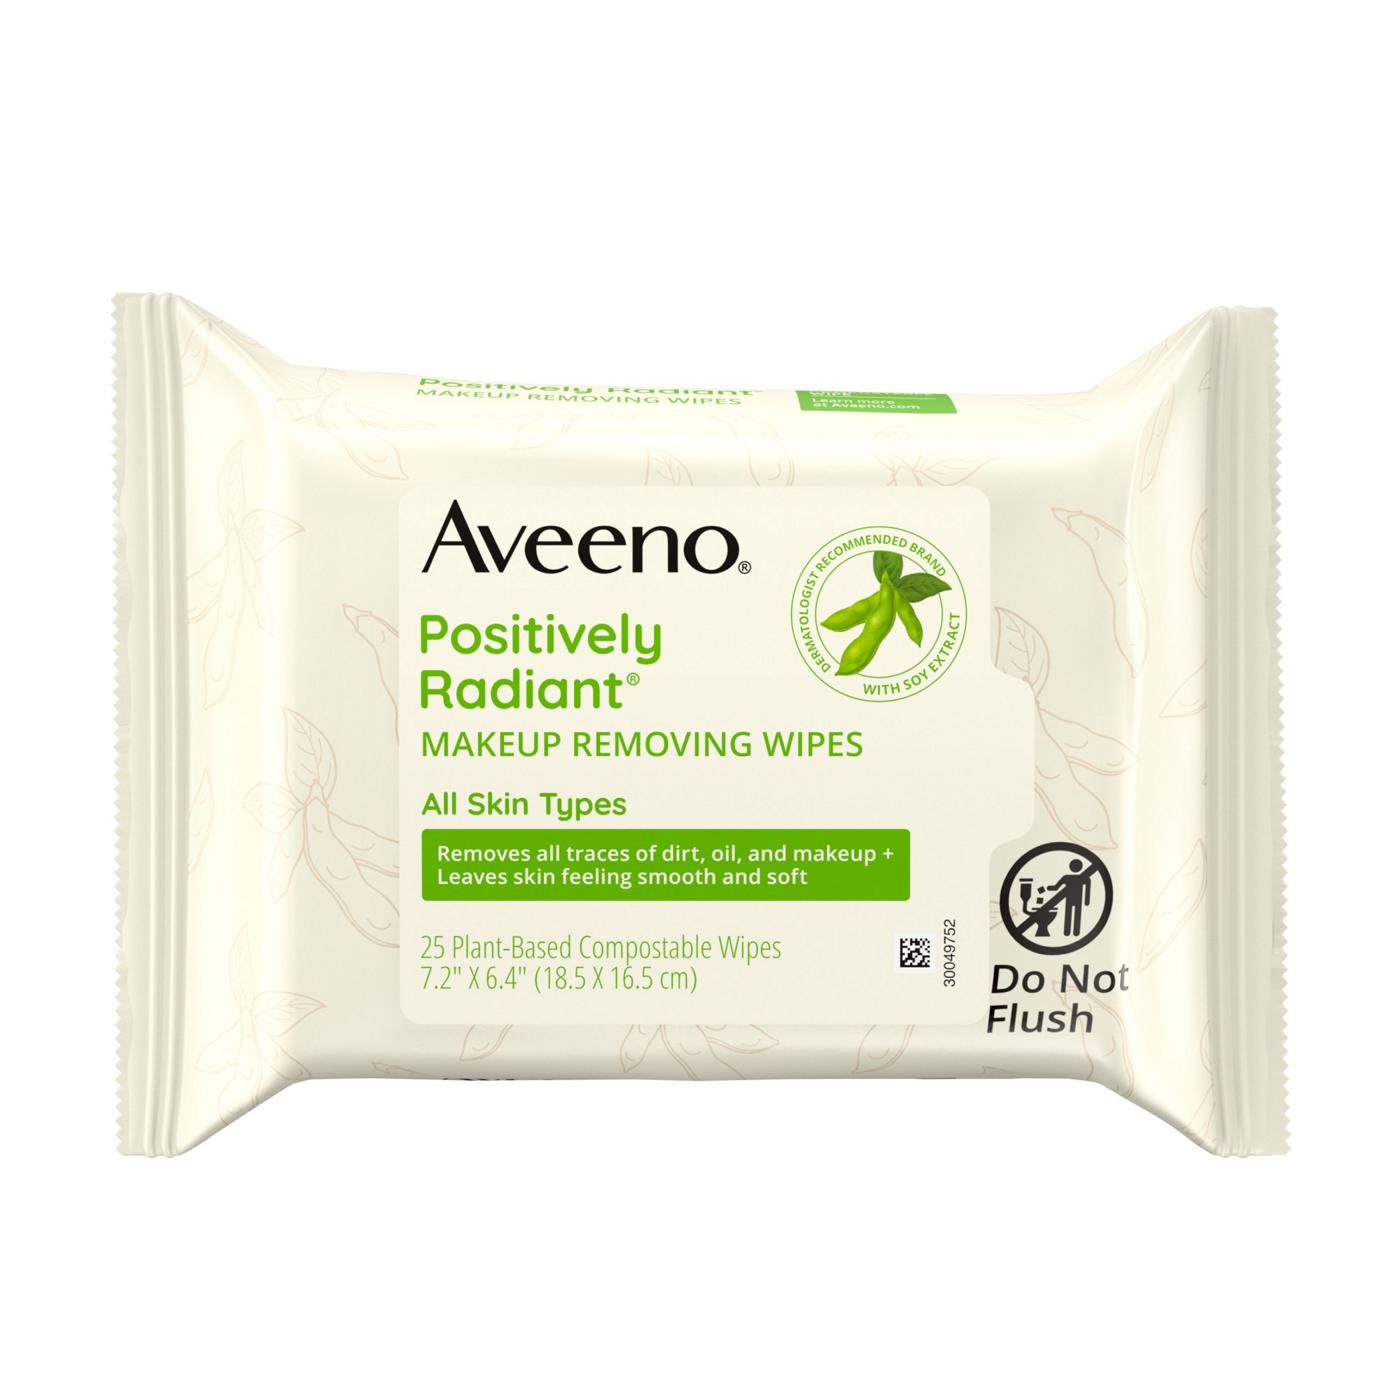 Aveeno Positively Radiant Makeup Removing Wipes; image 1 of 6